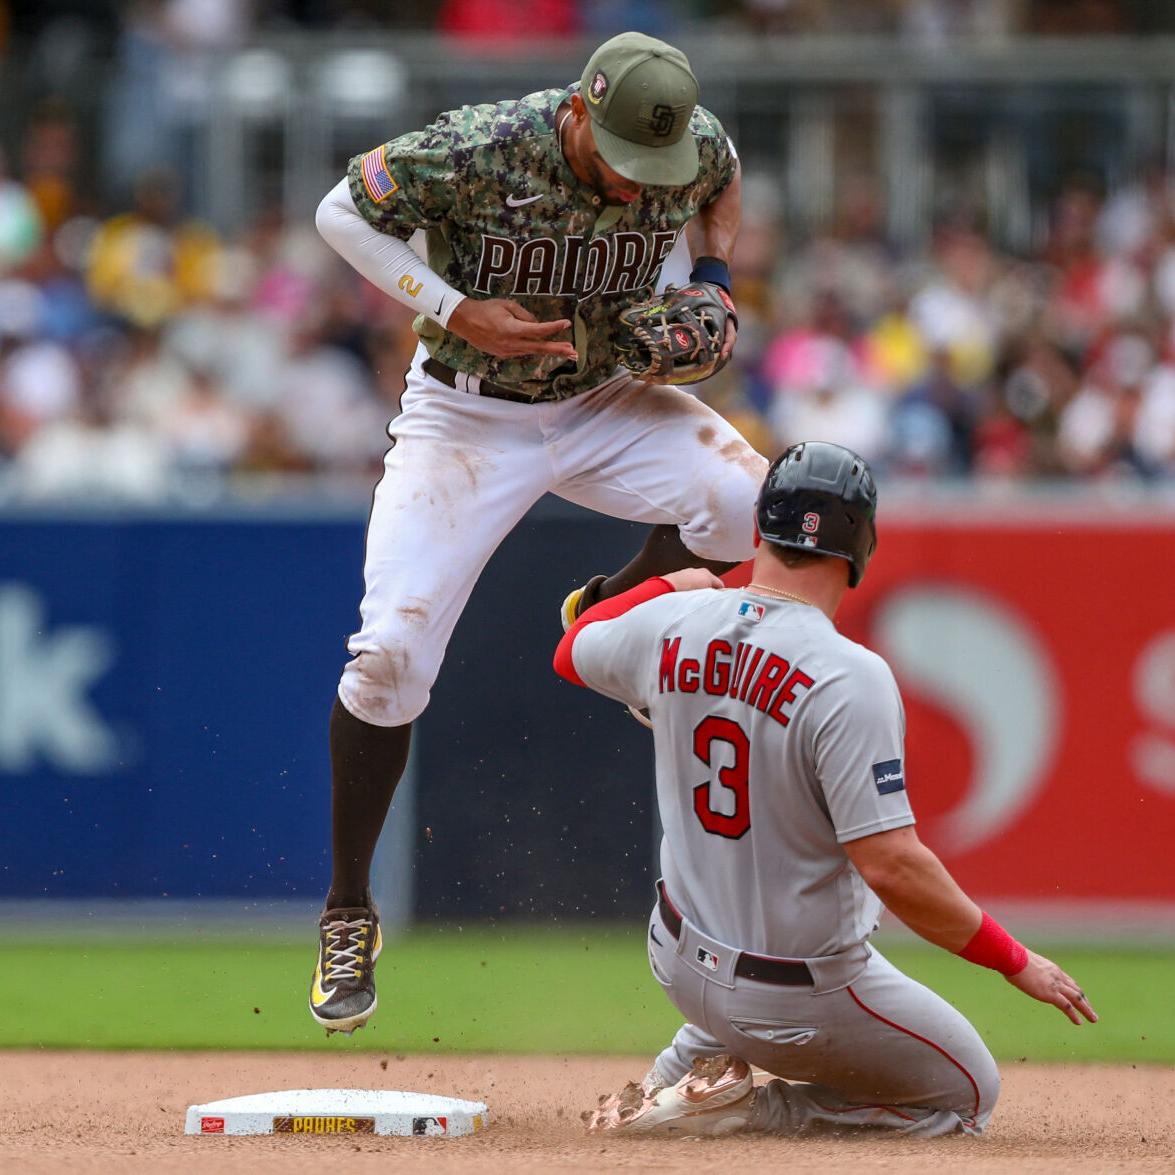 Rougned Odor's ninth-inning homer helps Padres take series from